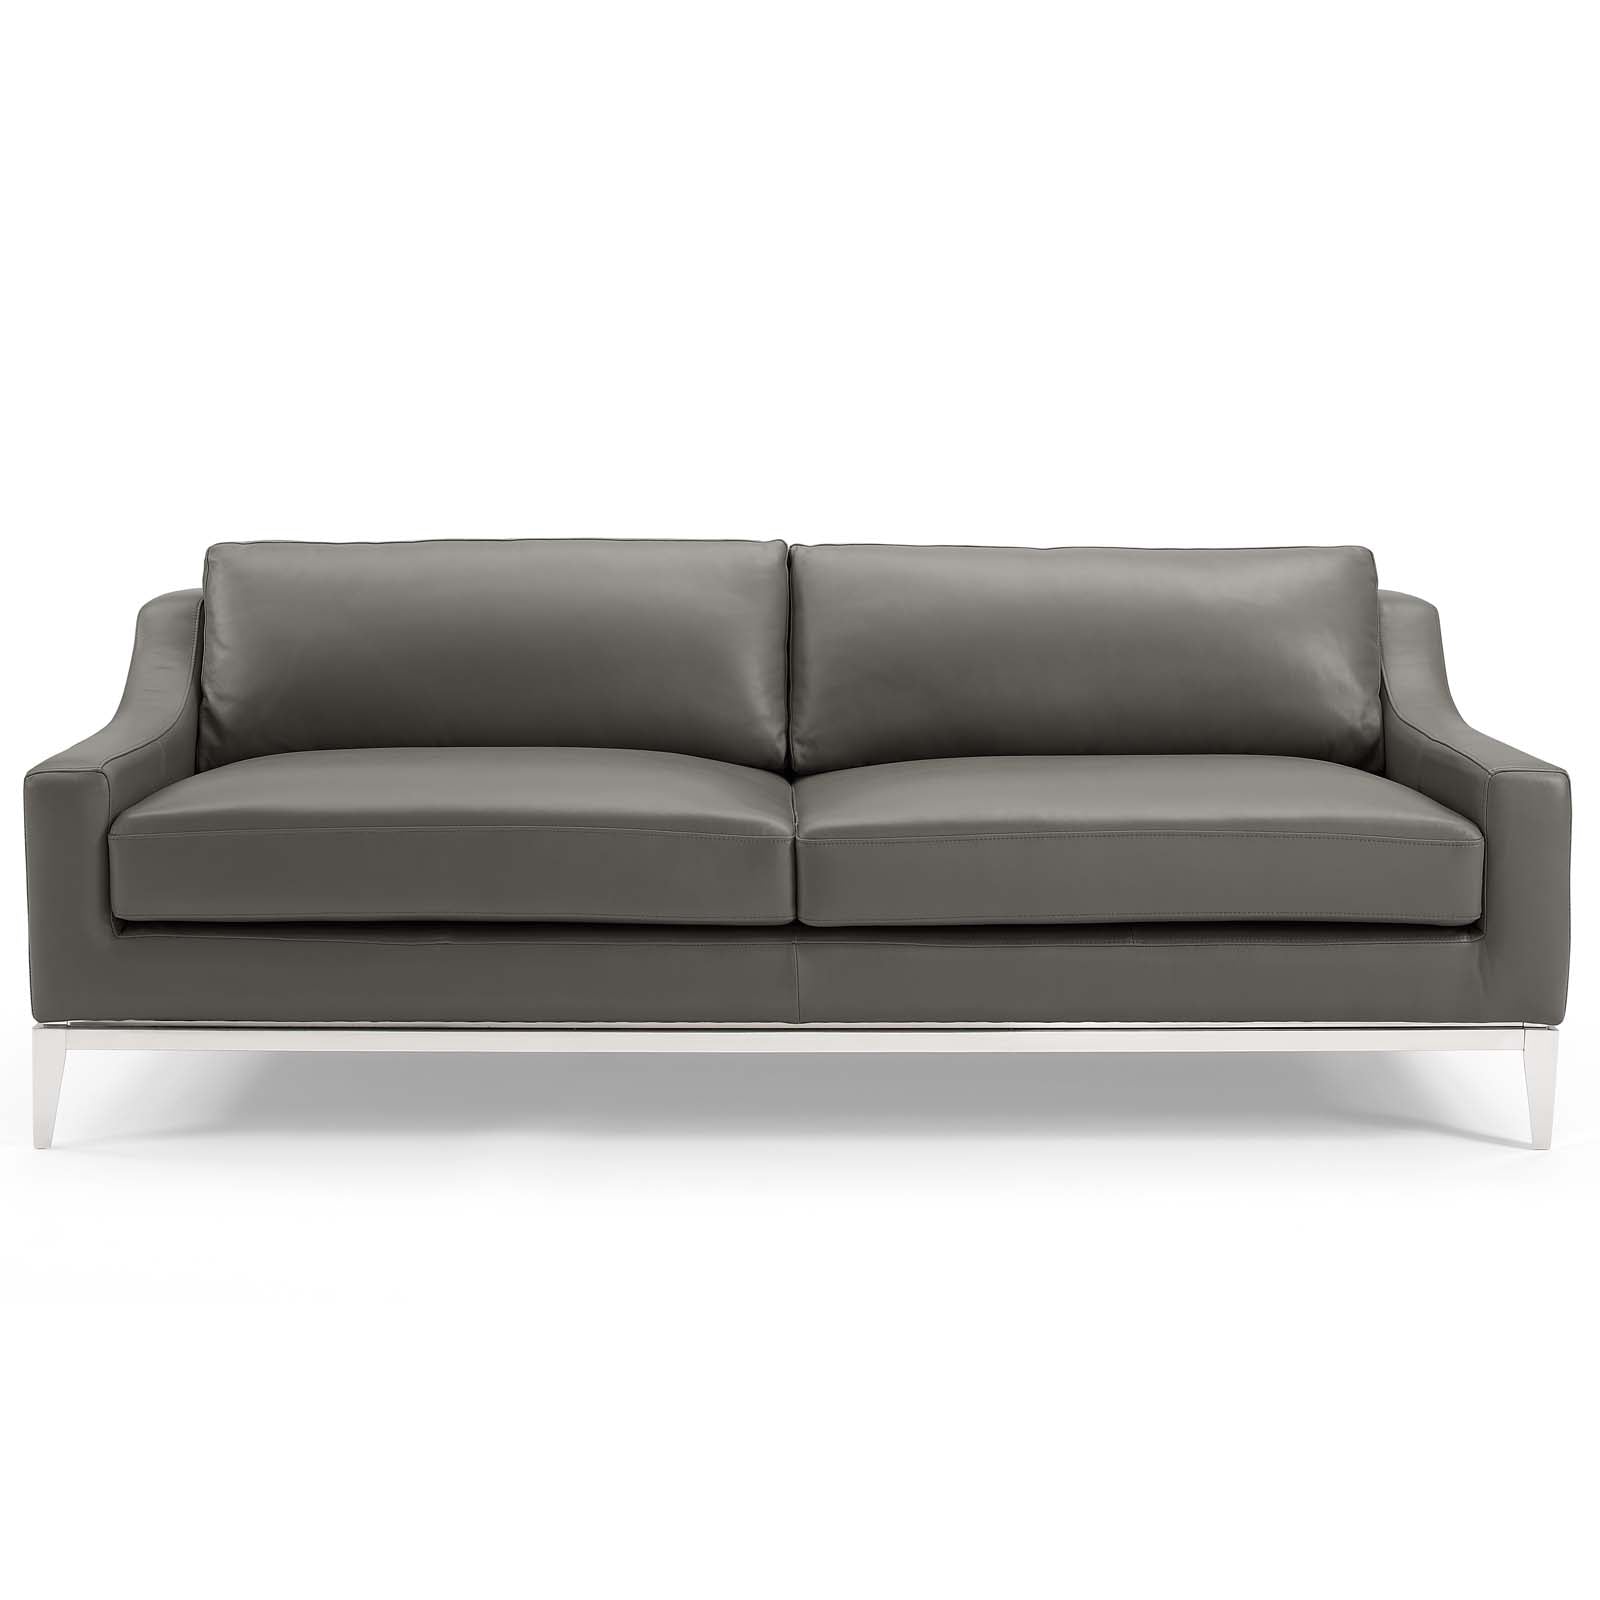 Modway Sofas & Couches - Harness 83.5" Sofa Gray